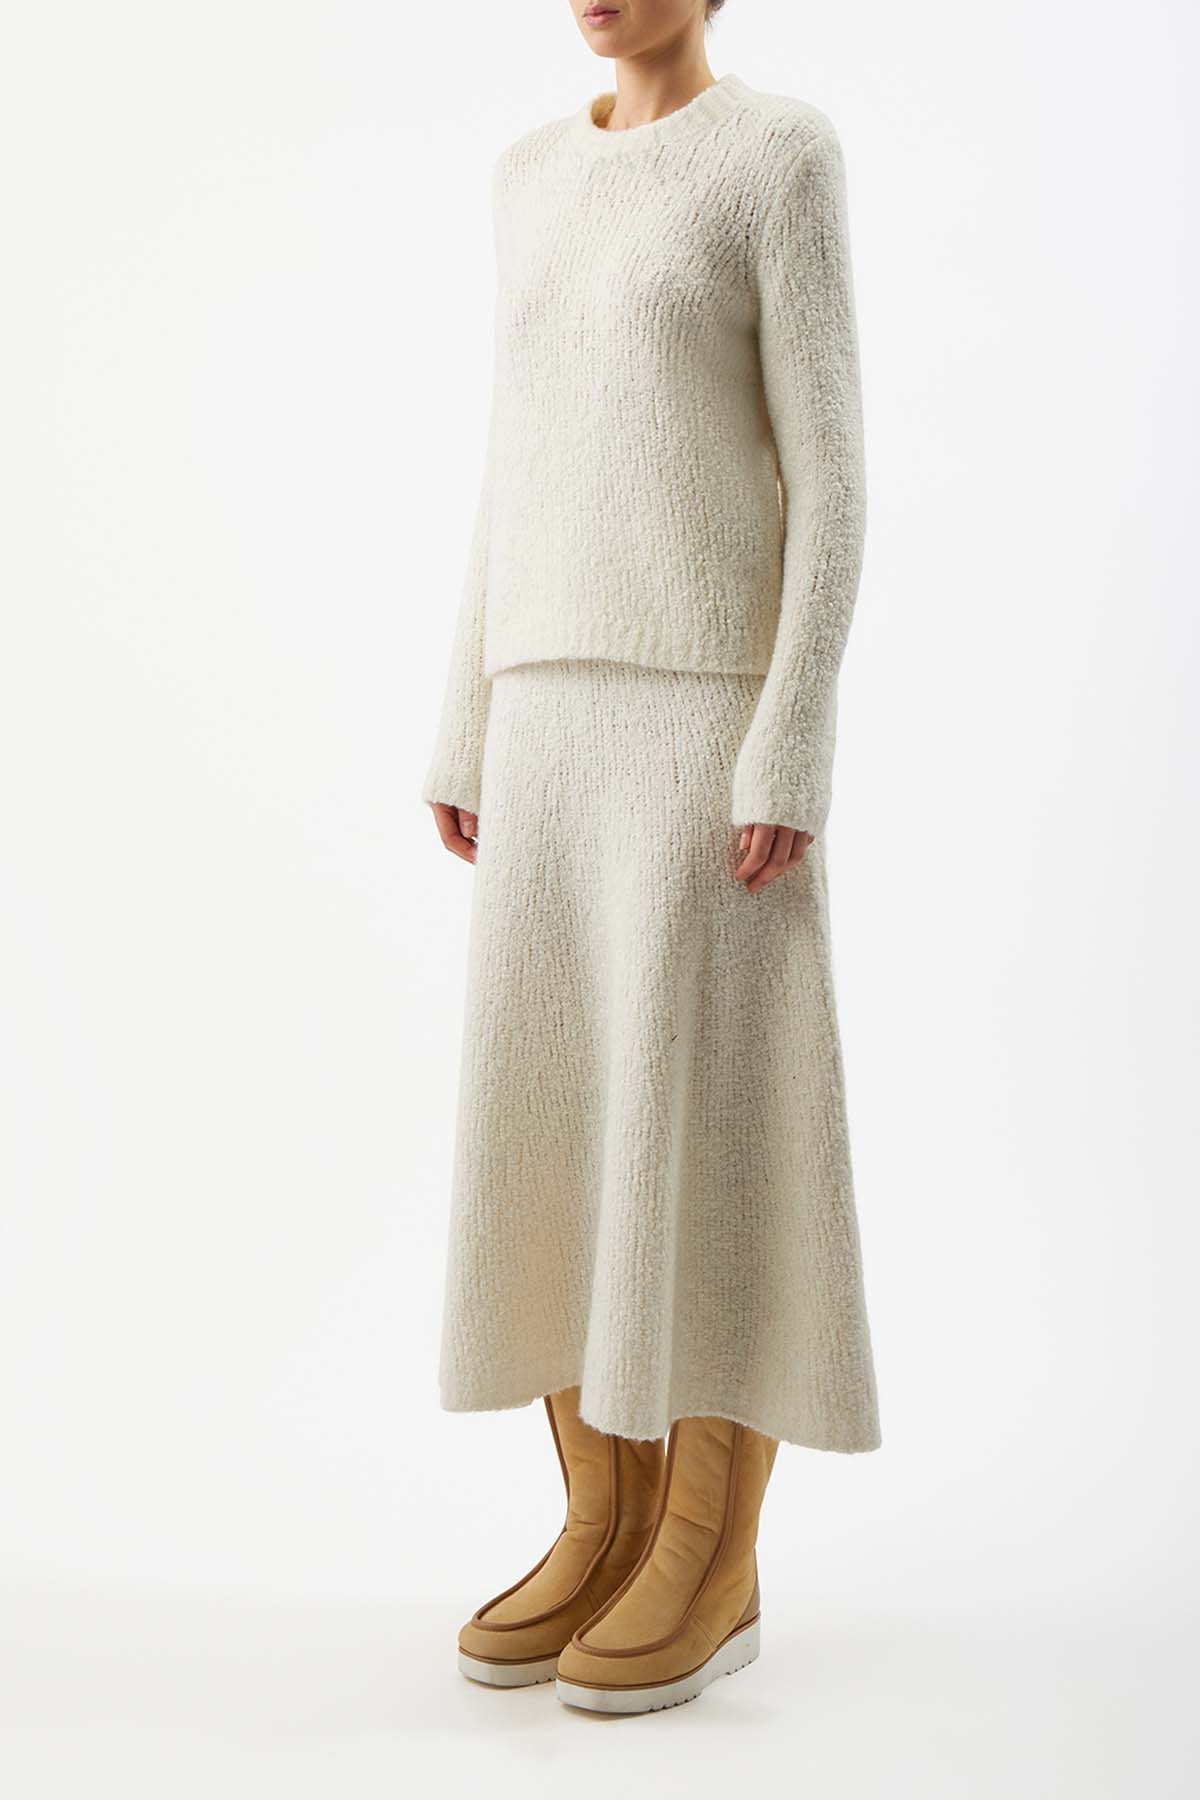 Pablo Skirt in Ivory Cashmere Boucle - 4